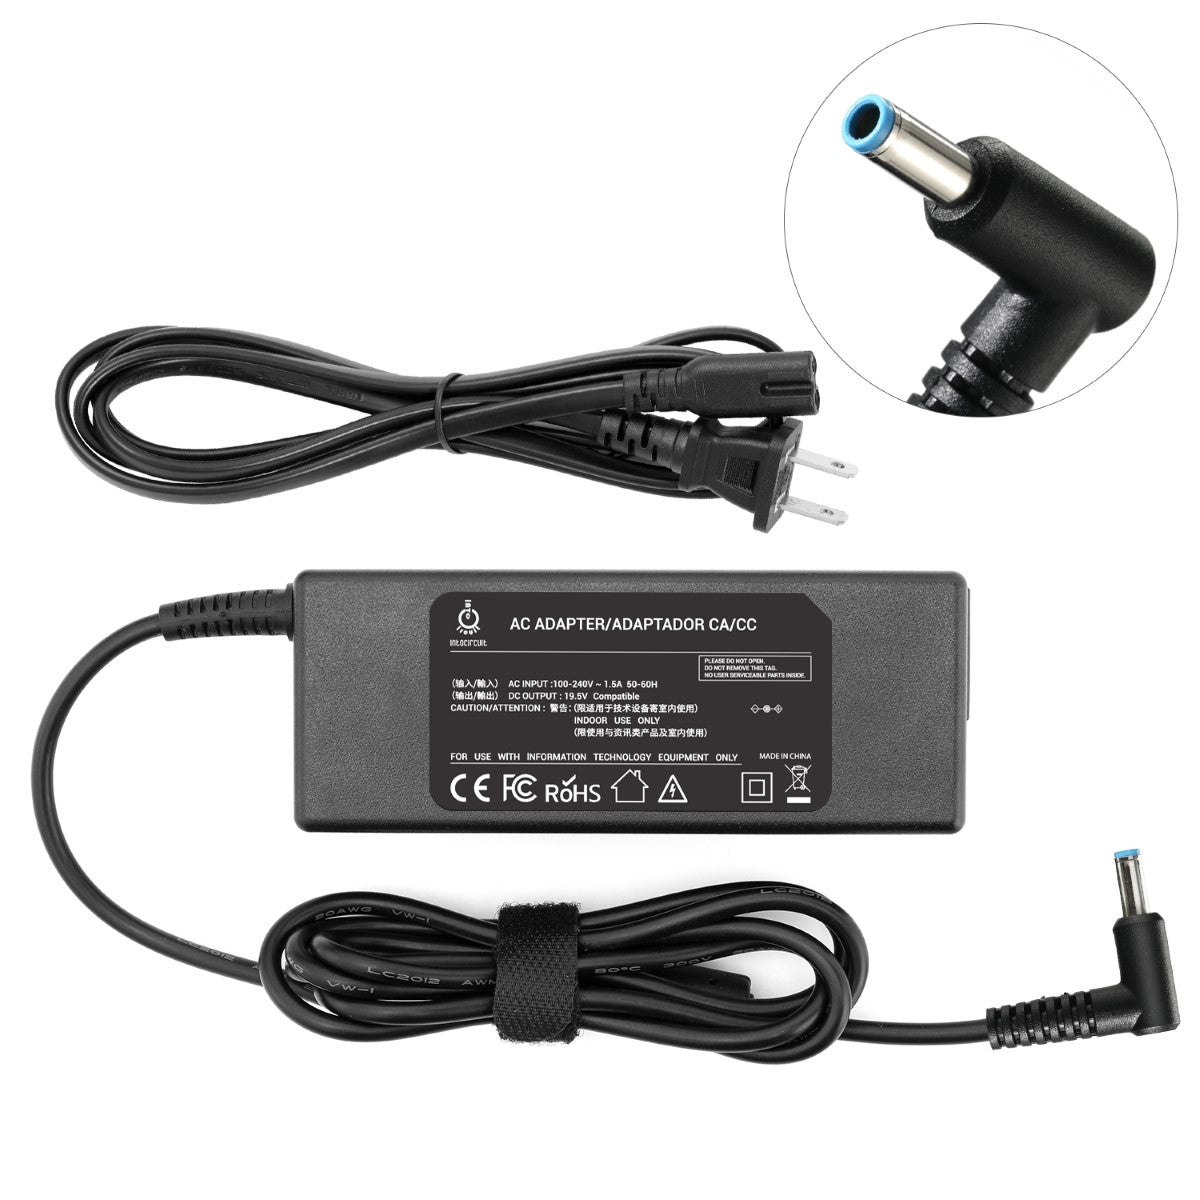 Charger for HP 340 G1 Notebook